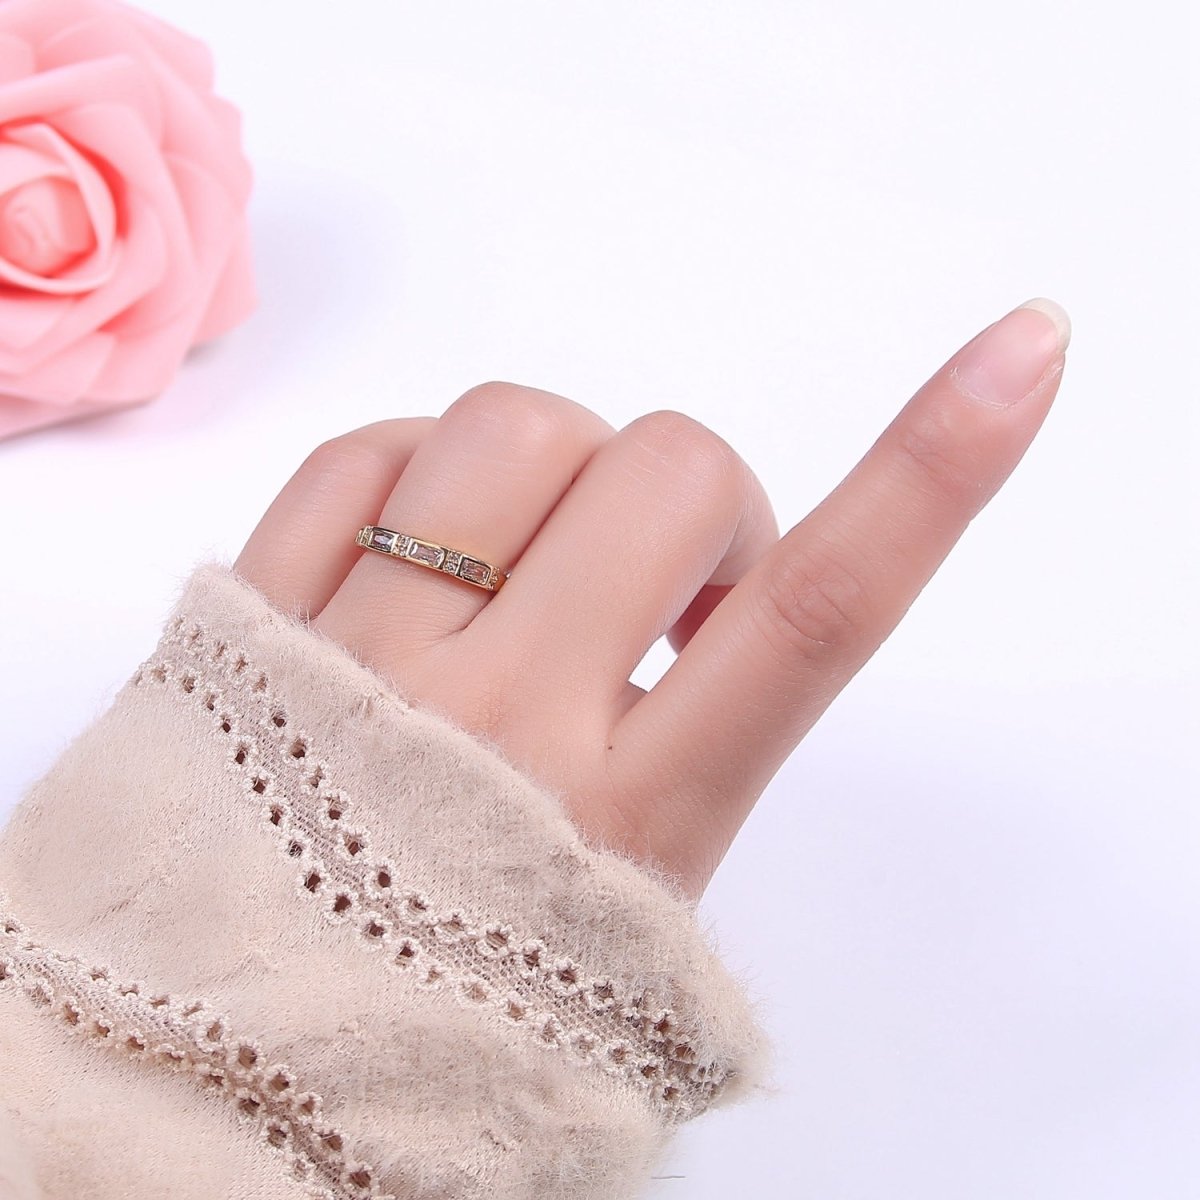 OS Dainty Gold band crystal ring stackable ring minimalist Jewelry feminine ring Adjustable S-453 - DLUXCA